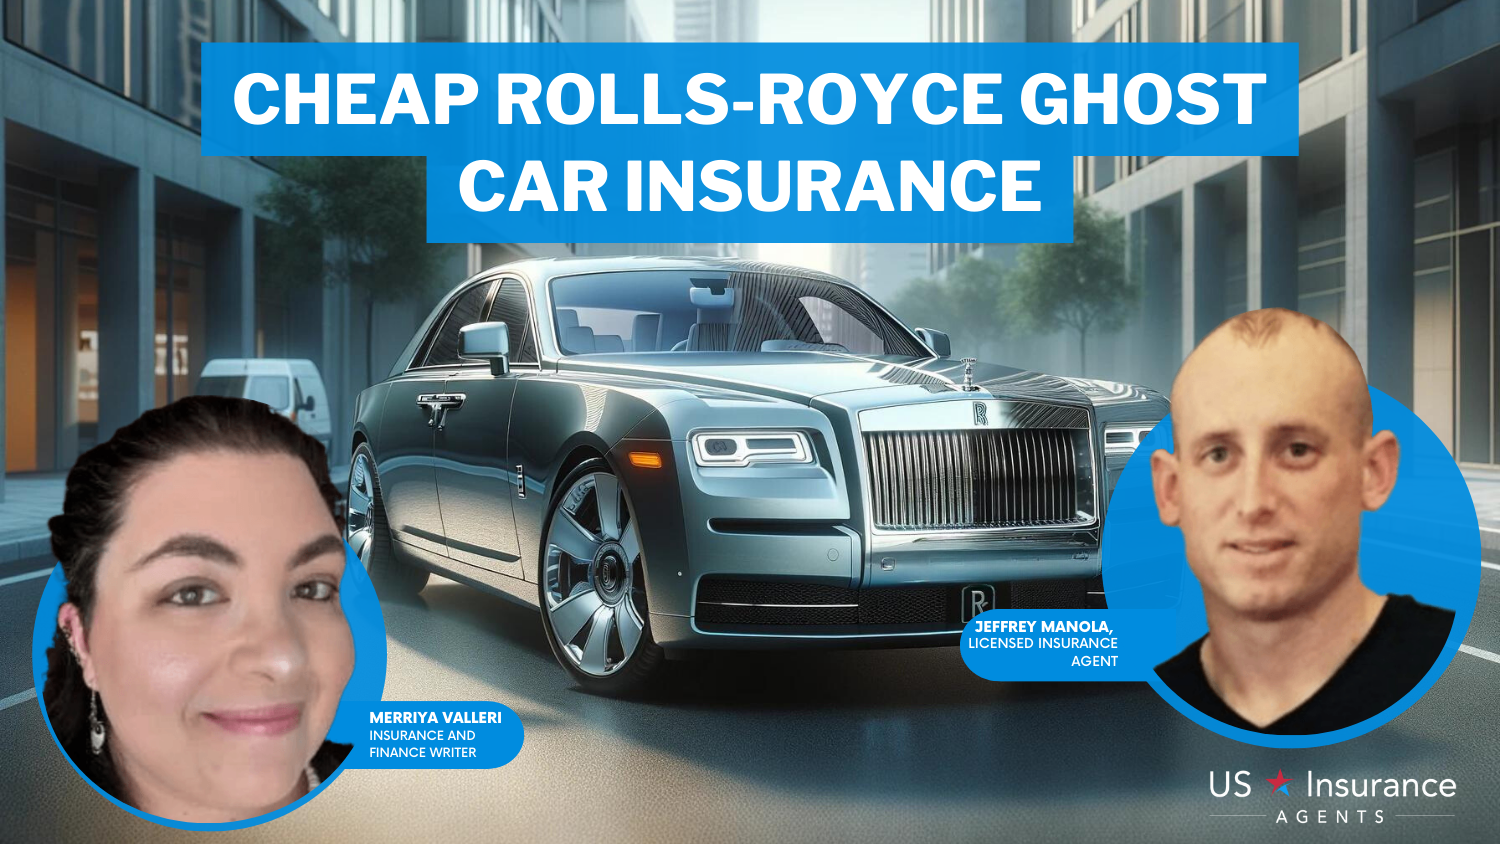 Cheap Rolls-Royce Ghost Car Insurance: Chubb, Allstate, and Erie